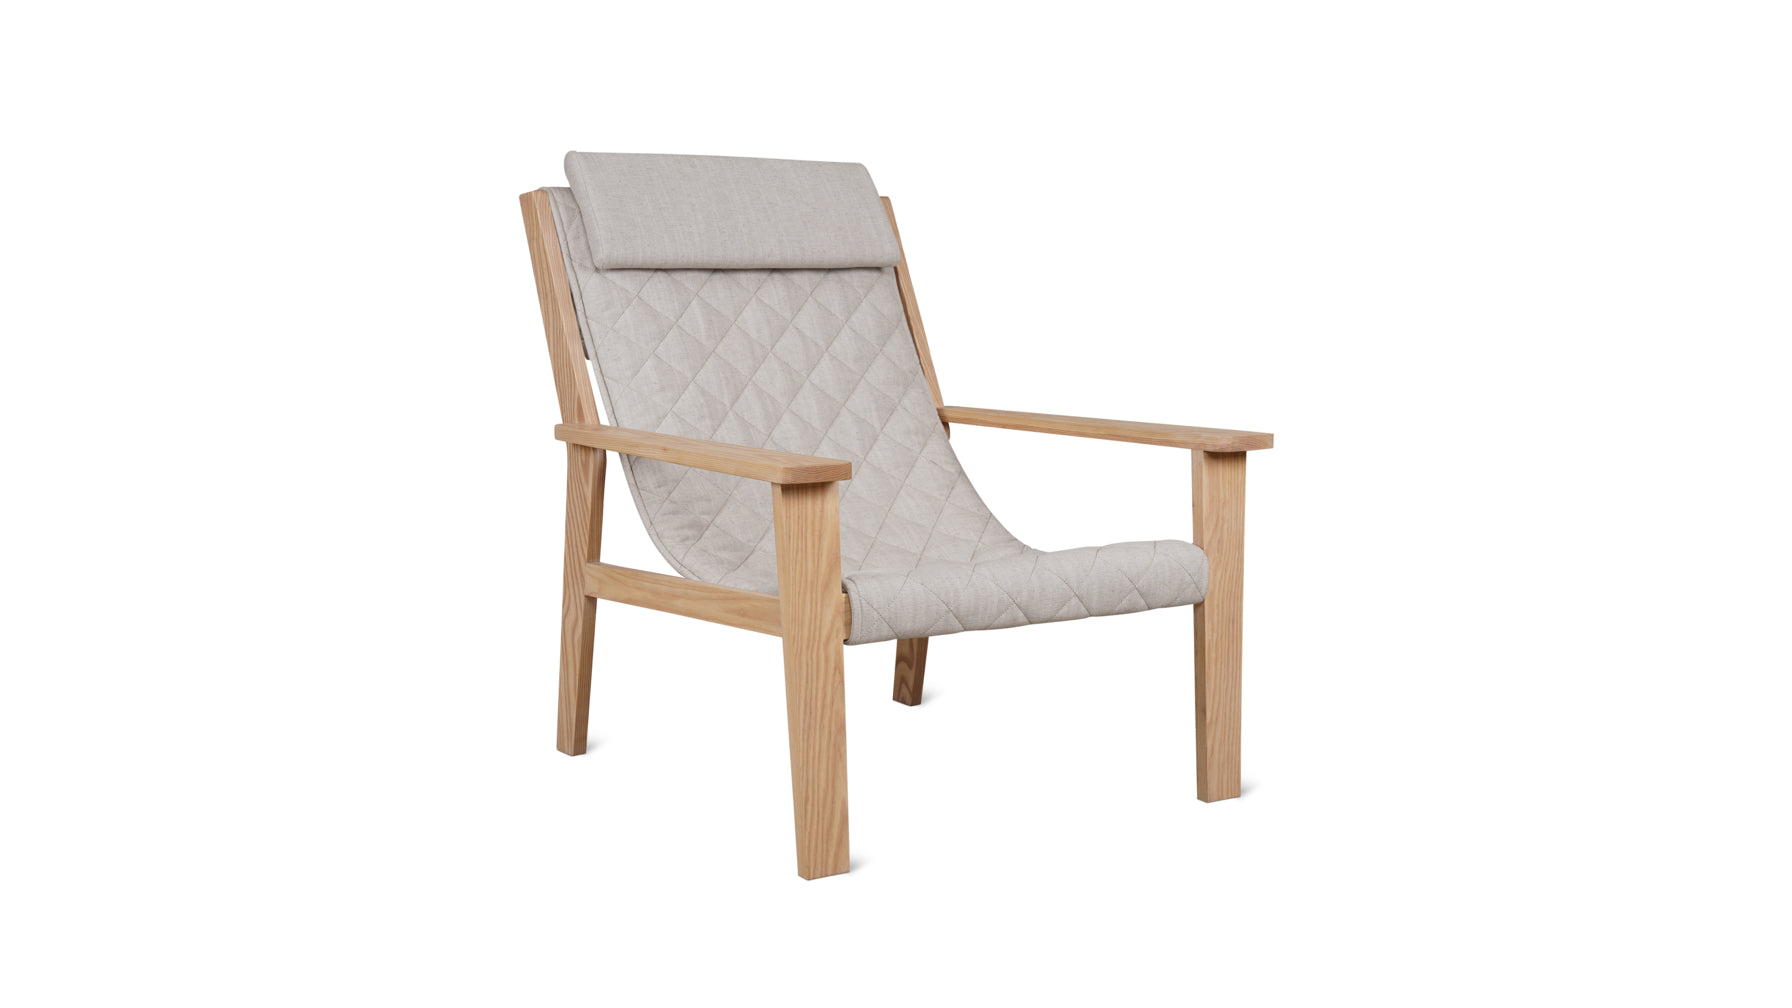 Sweet Life Sling Lounge Chair With Headrest, Natural Ash - Image 2